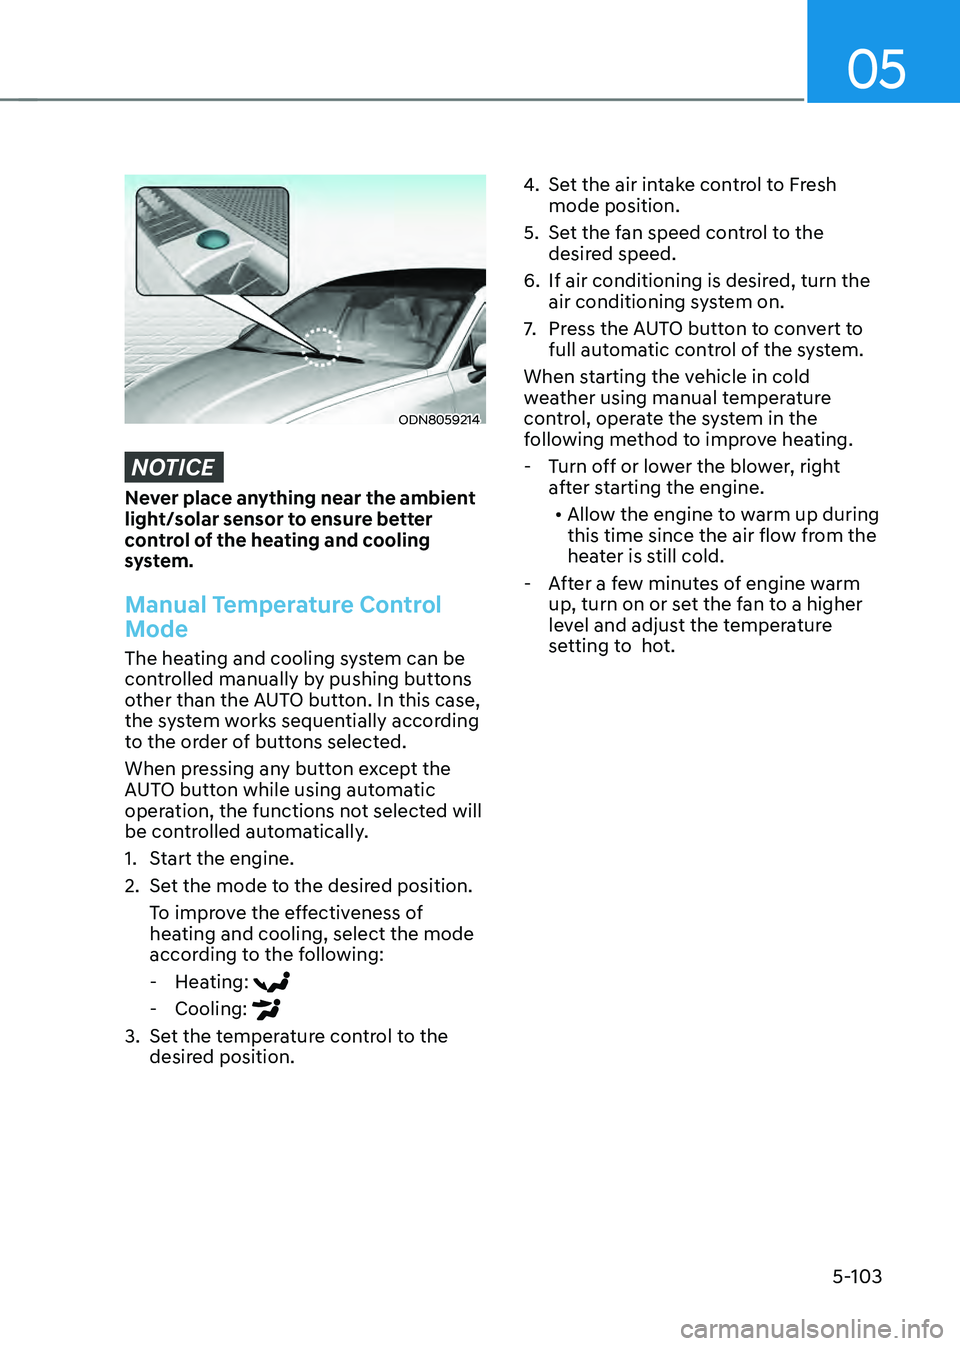 HYUNDAI SONATA HYBRID 2020  Owners Manual 05
5-103
ODN8059214
NOTICE
Never place anything near the ambient 
light/solar sensor to ensure better 
control of the heating and cooling 
system.
Manual Temperature Control 
Mode
The heating and cool